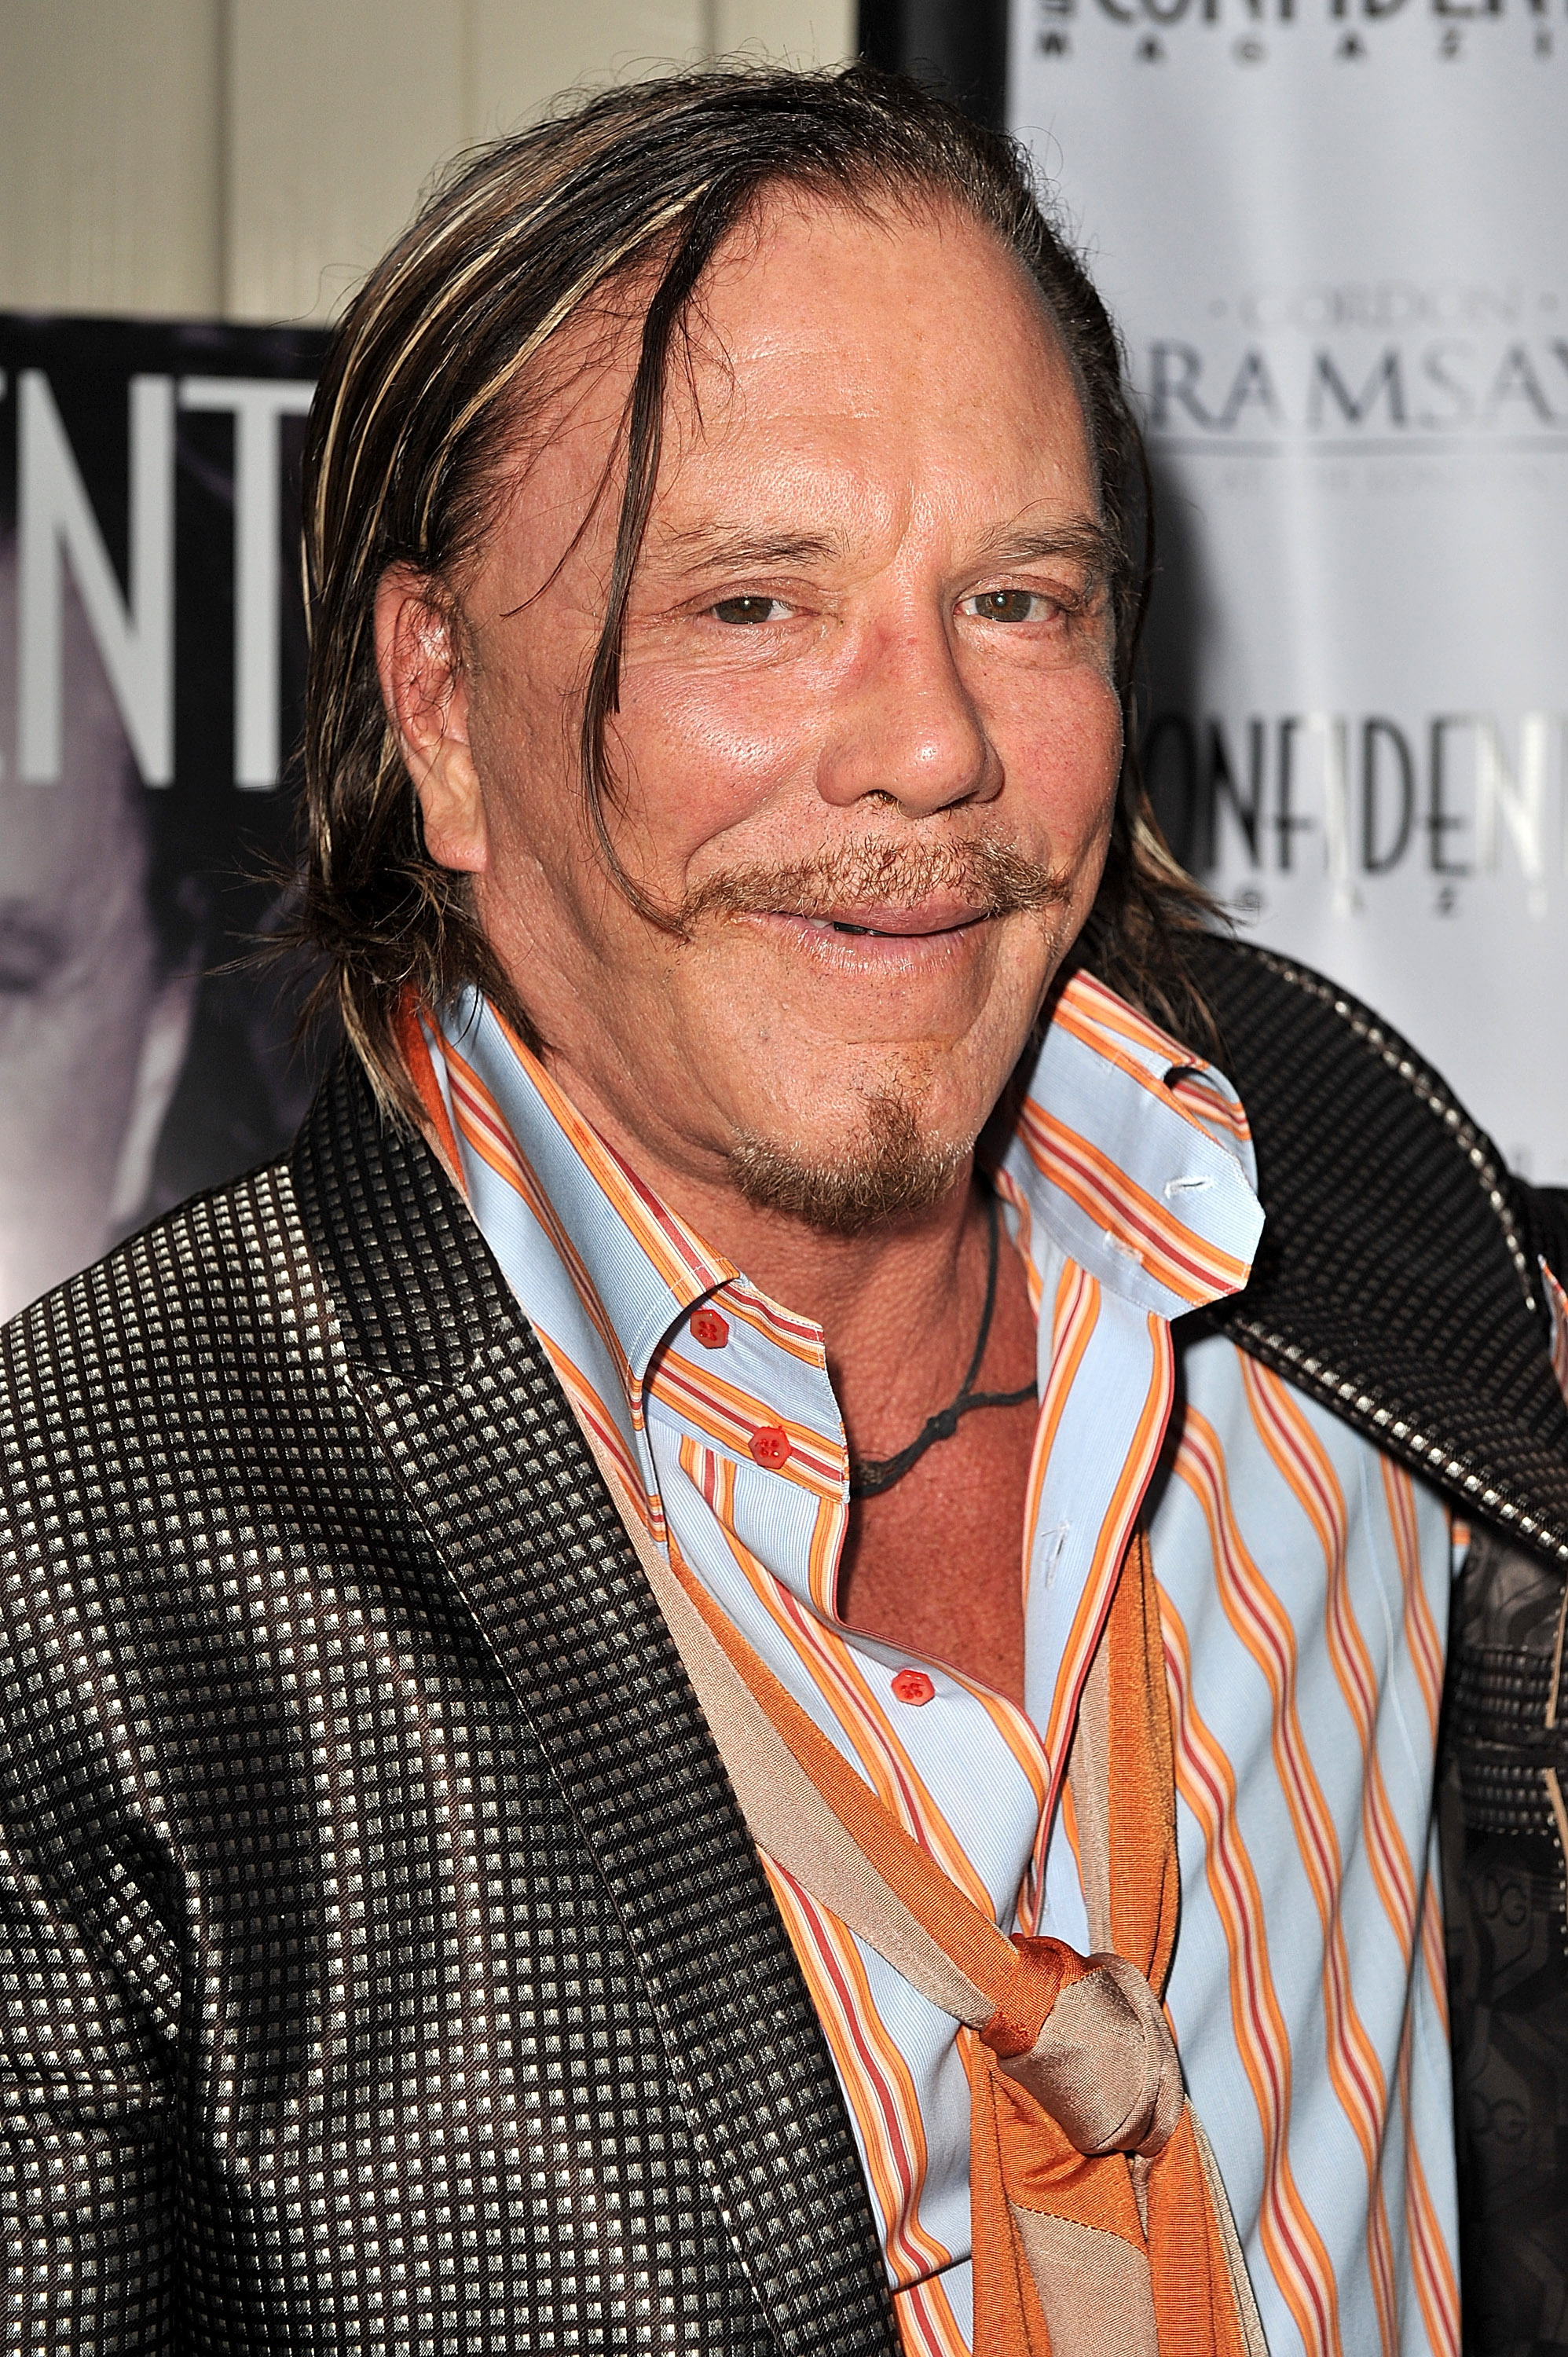 Mickey Rourke at the Los Angeles Confidential Magazine Golden Globe Celebration on January 12, 2009, in West Hollywood, California. | Source: Getty Images